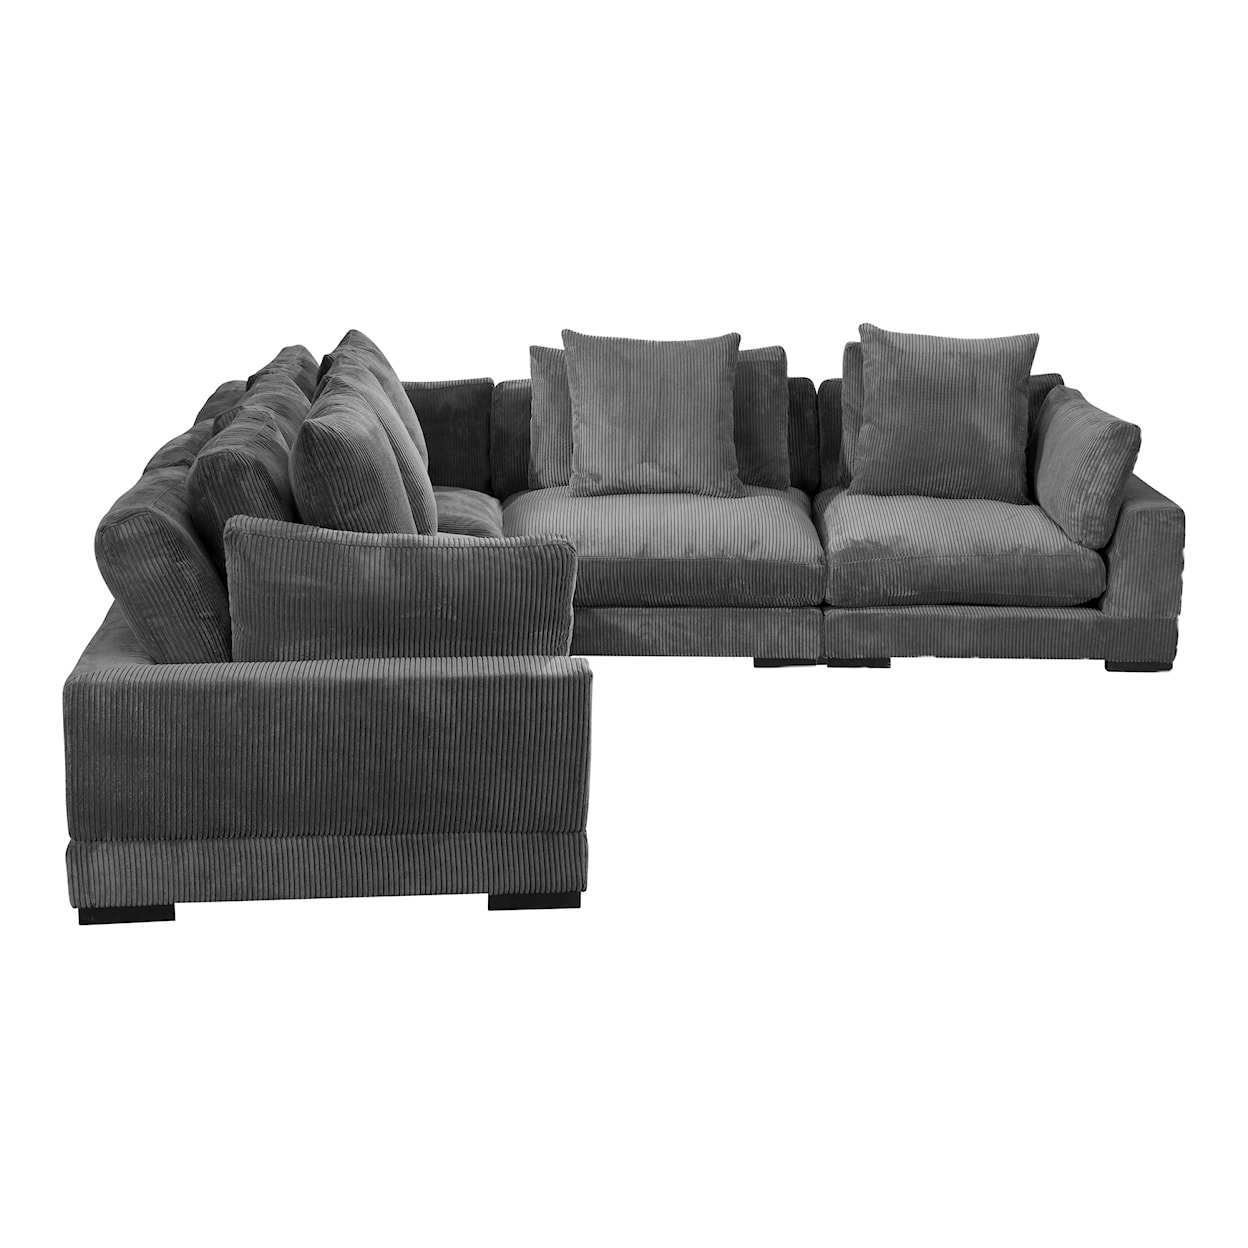 Moe's Home Collection Tumble Tumble Classic L Modular Sectional Charcoal